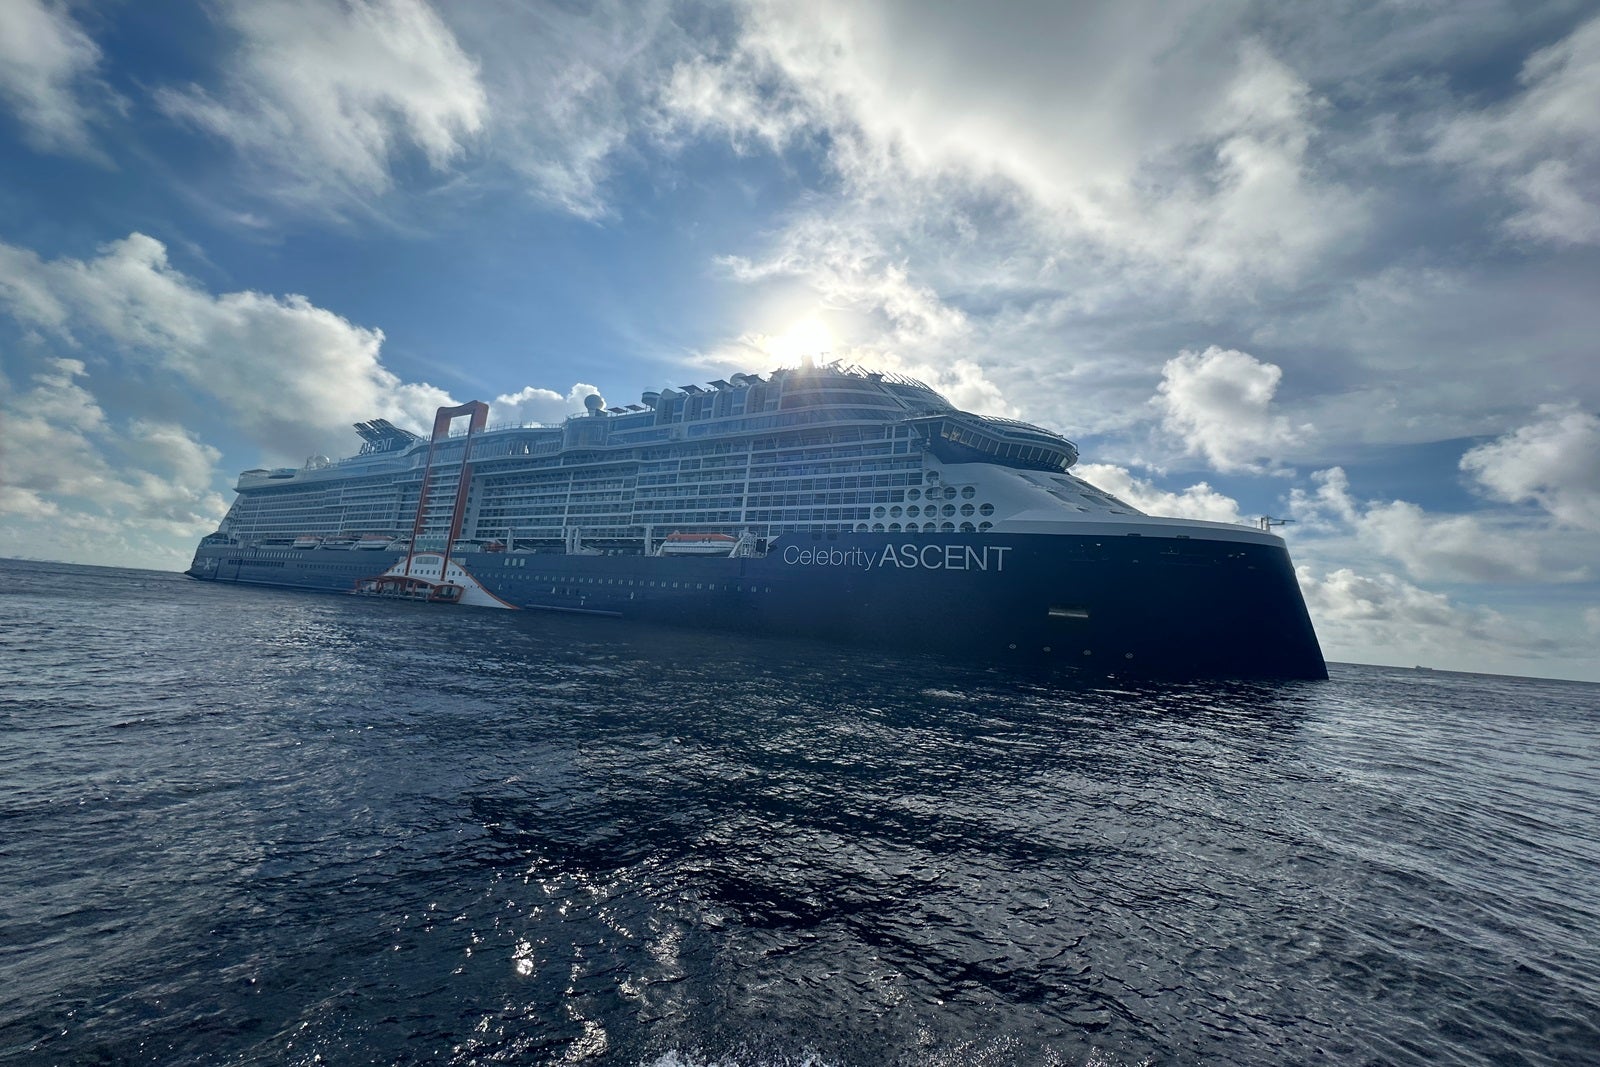 A cruise ship -- Celebrity Ascent -- floats in the water with the sun, blue sky and clouds behind it.